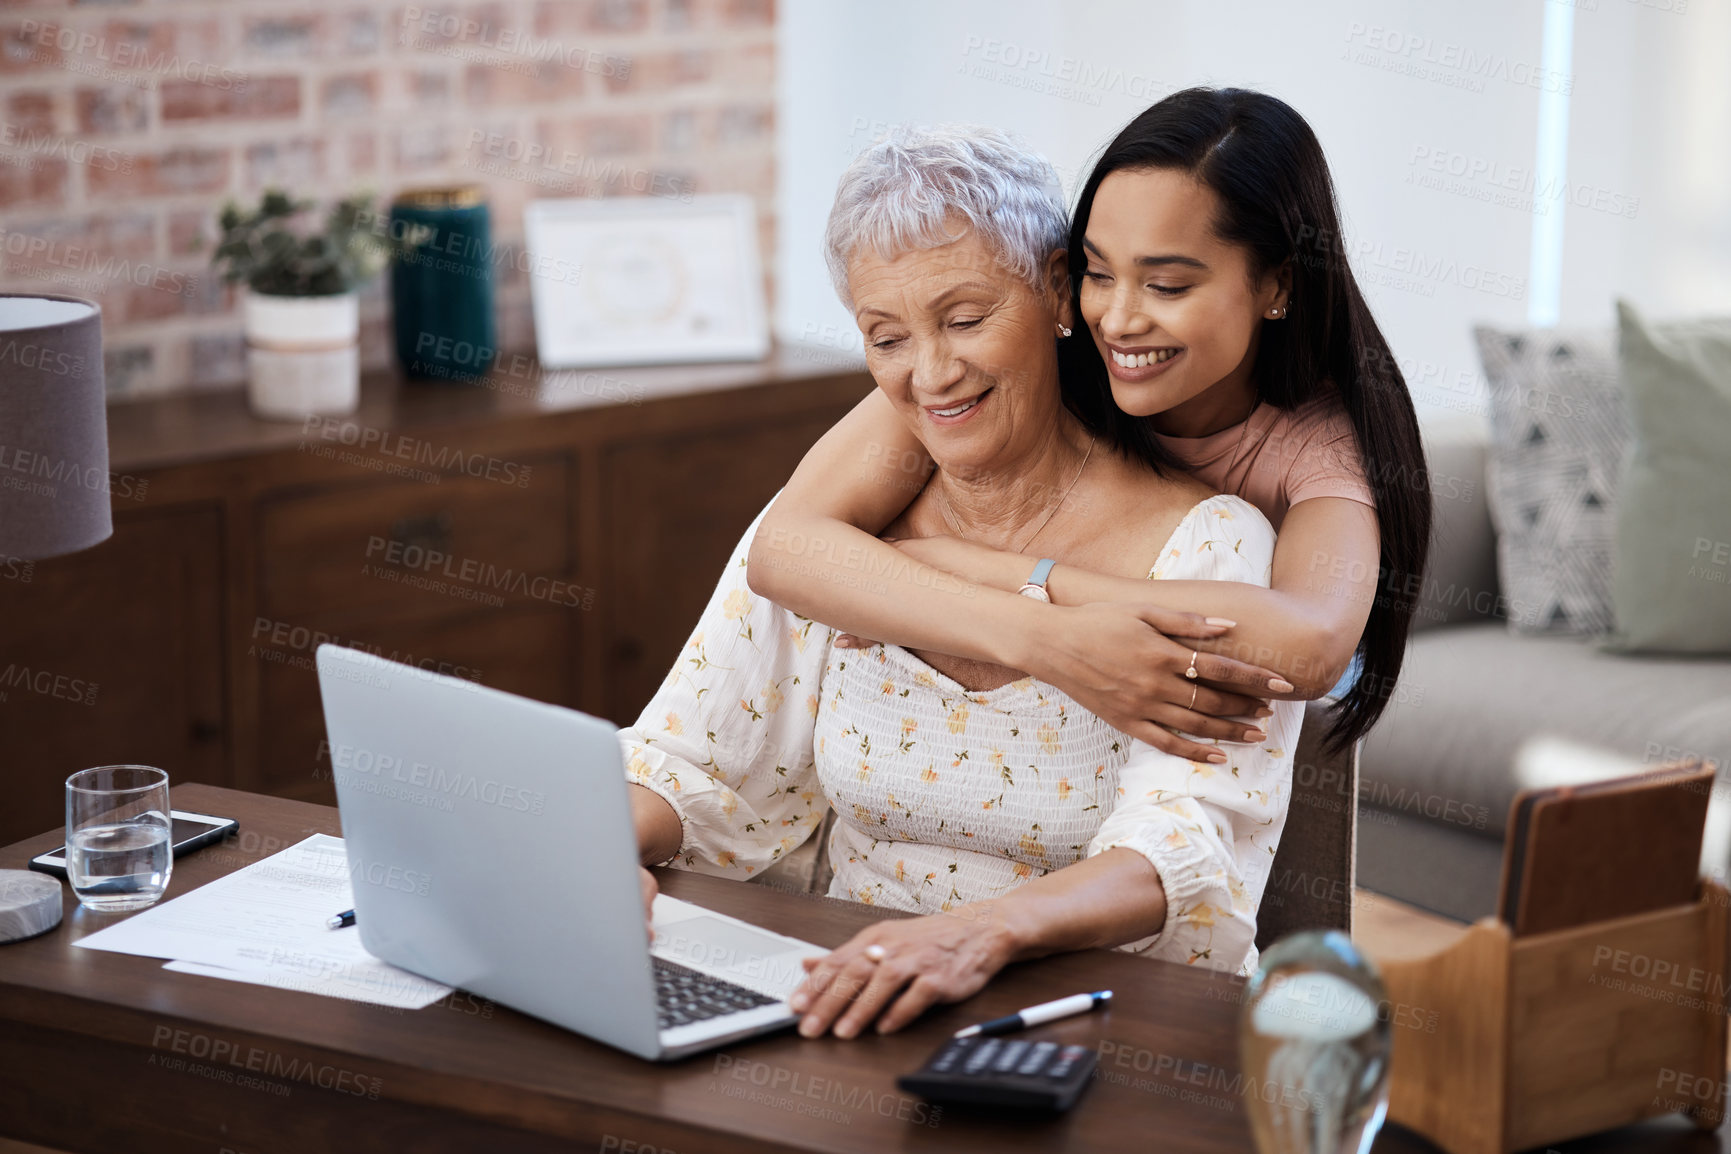 Buy stock photo Shot of a young woman using a laptop with her elderly mother while going through finances at home